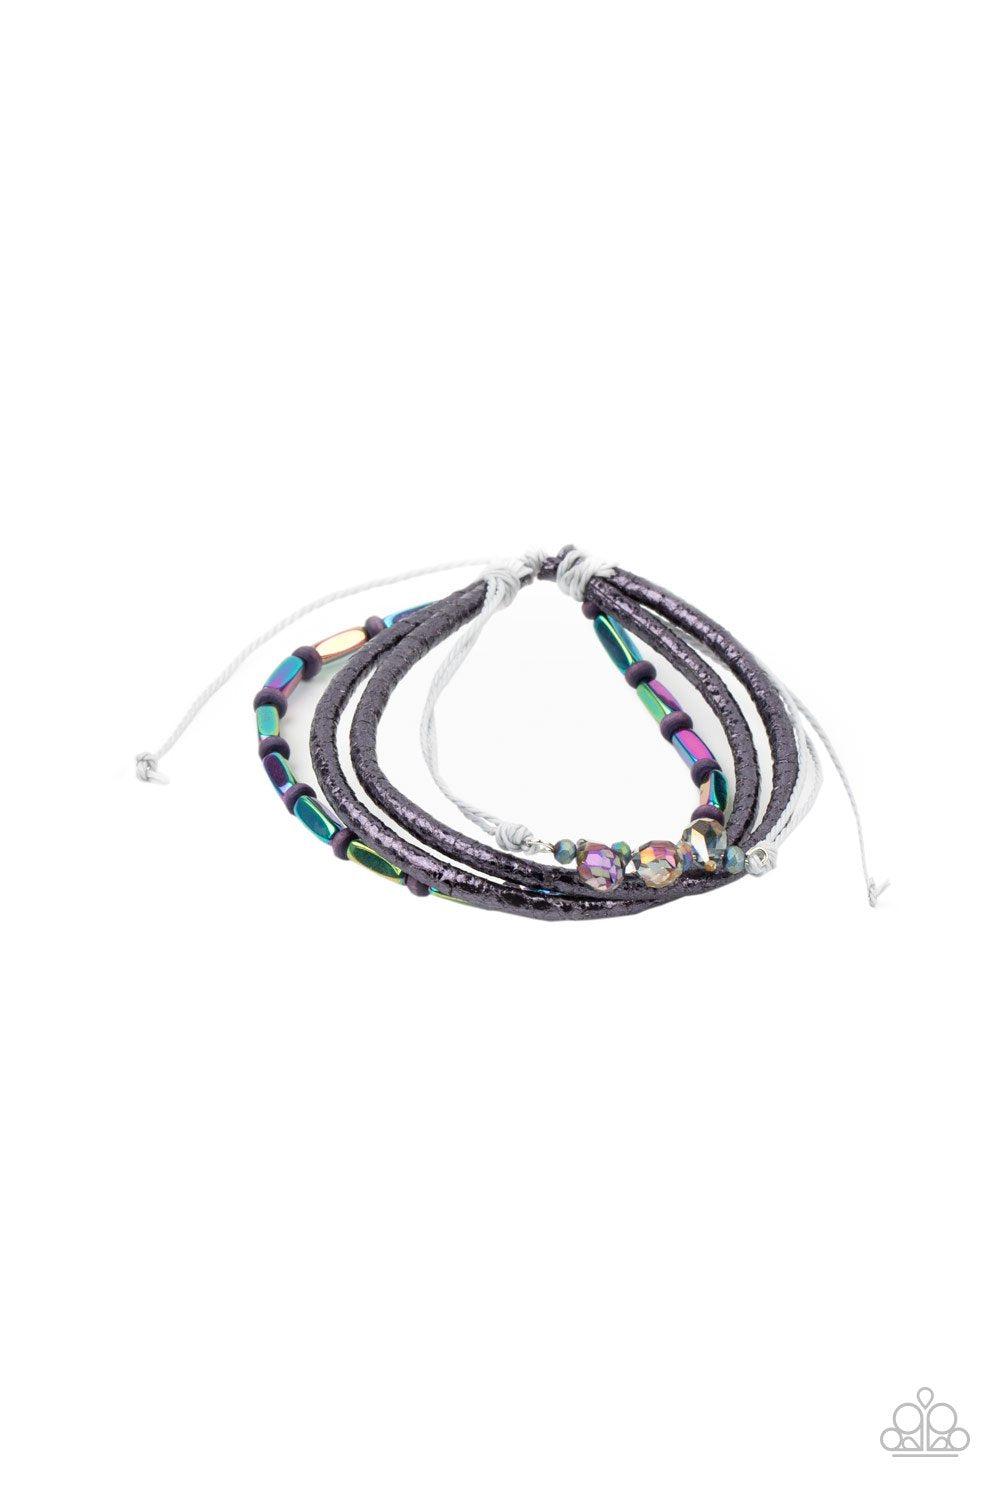 Holographic Hike Multi Oil Spill Urban Bracelet - Paparazzi Accessories- lightbox - CarasShop.com - $5 Jewelry by Cara Jewels